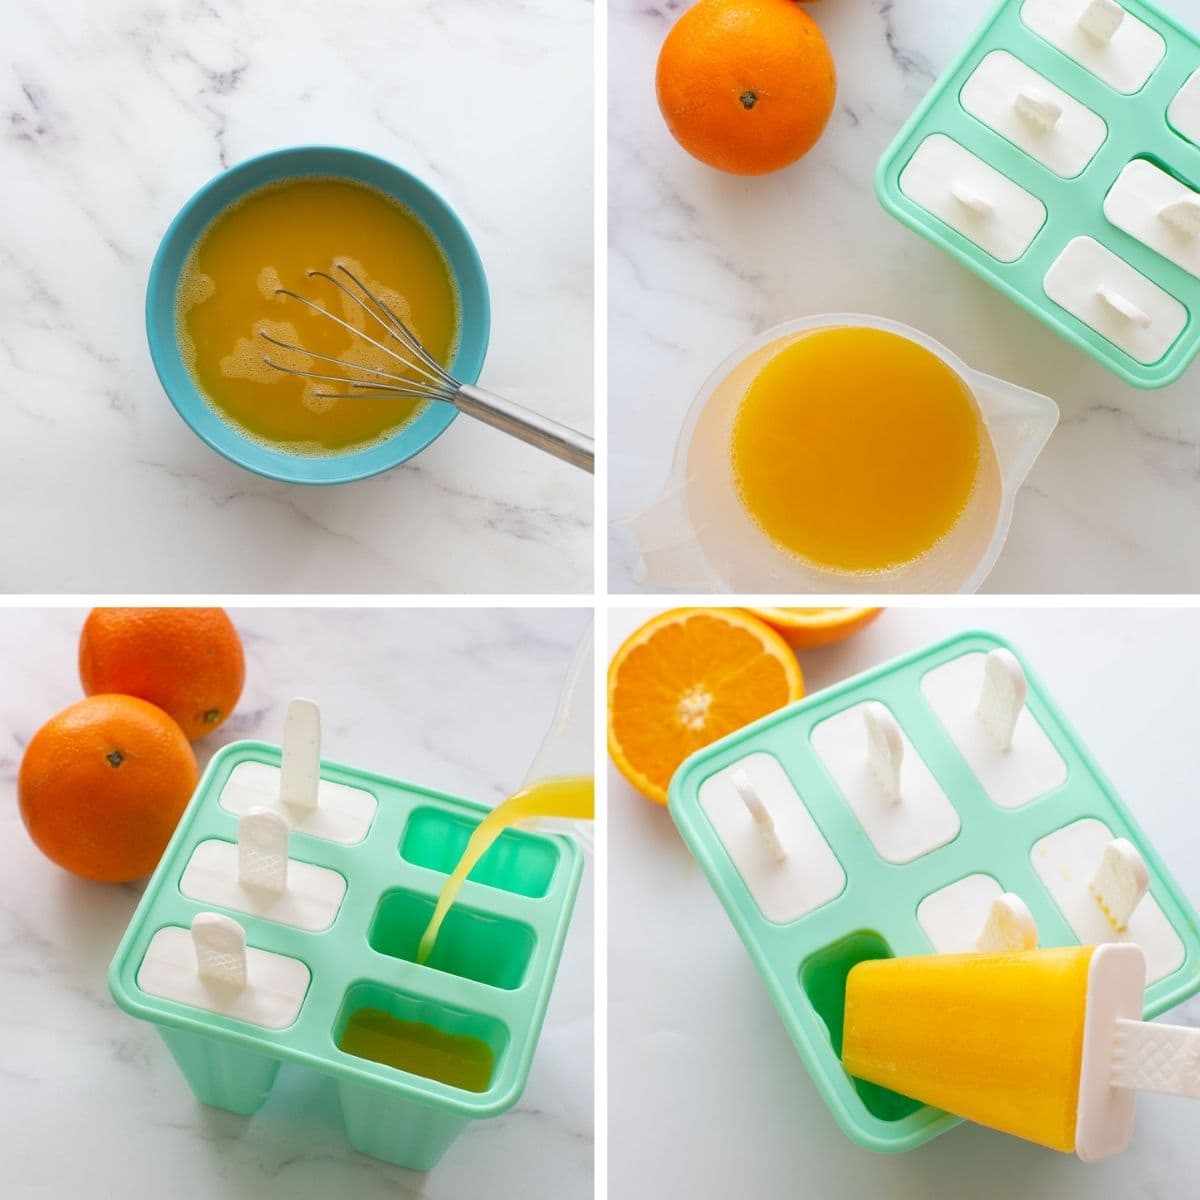 Step by step images showing how to make orange popsicles.